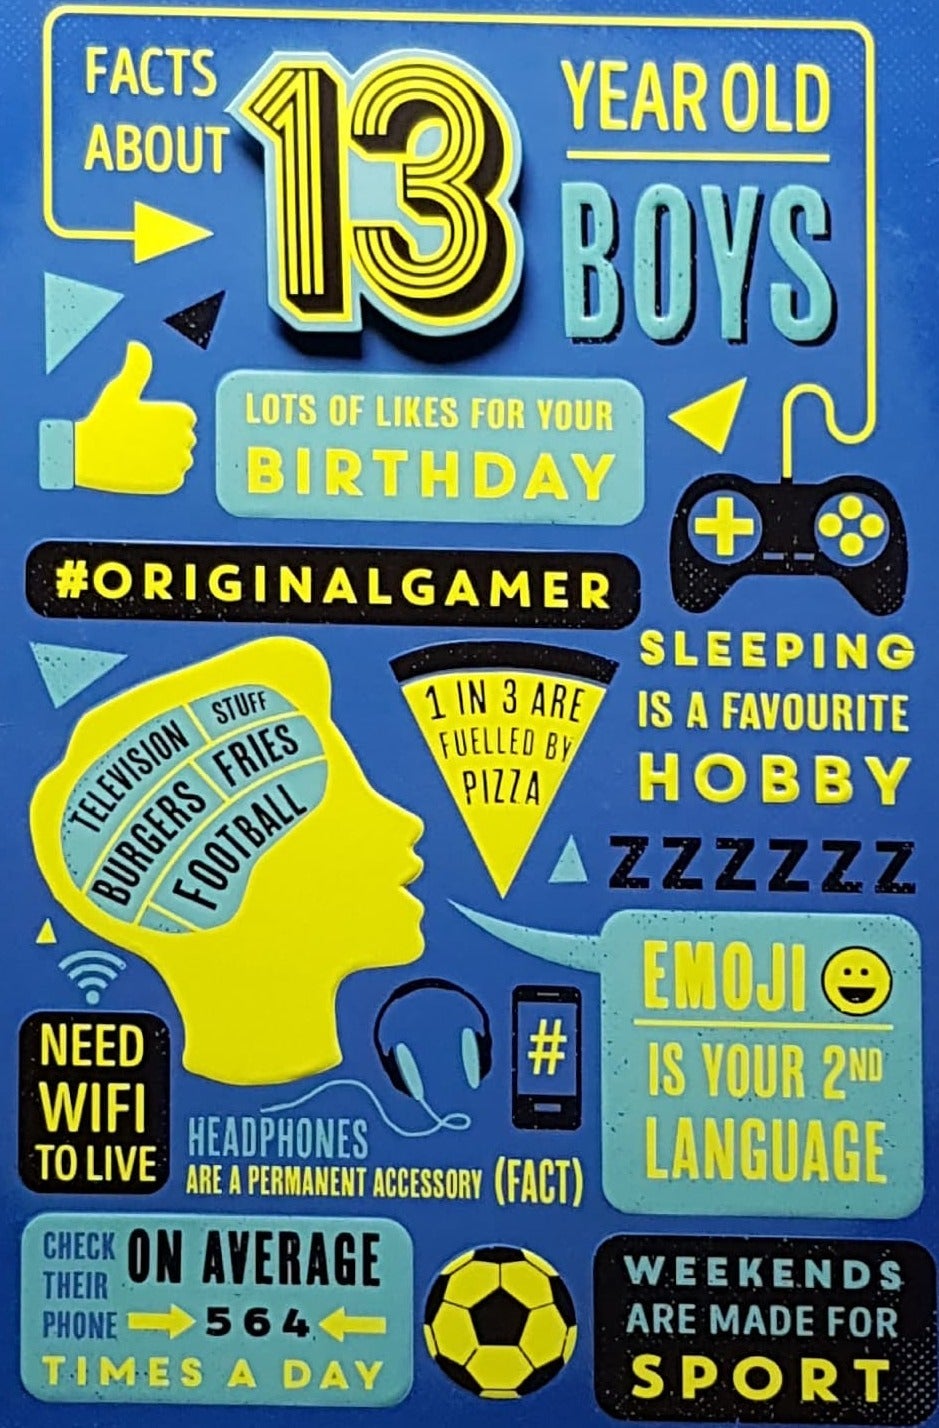 Age 13 Birthday Card - Facts About 13 Year Old Boys